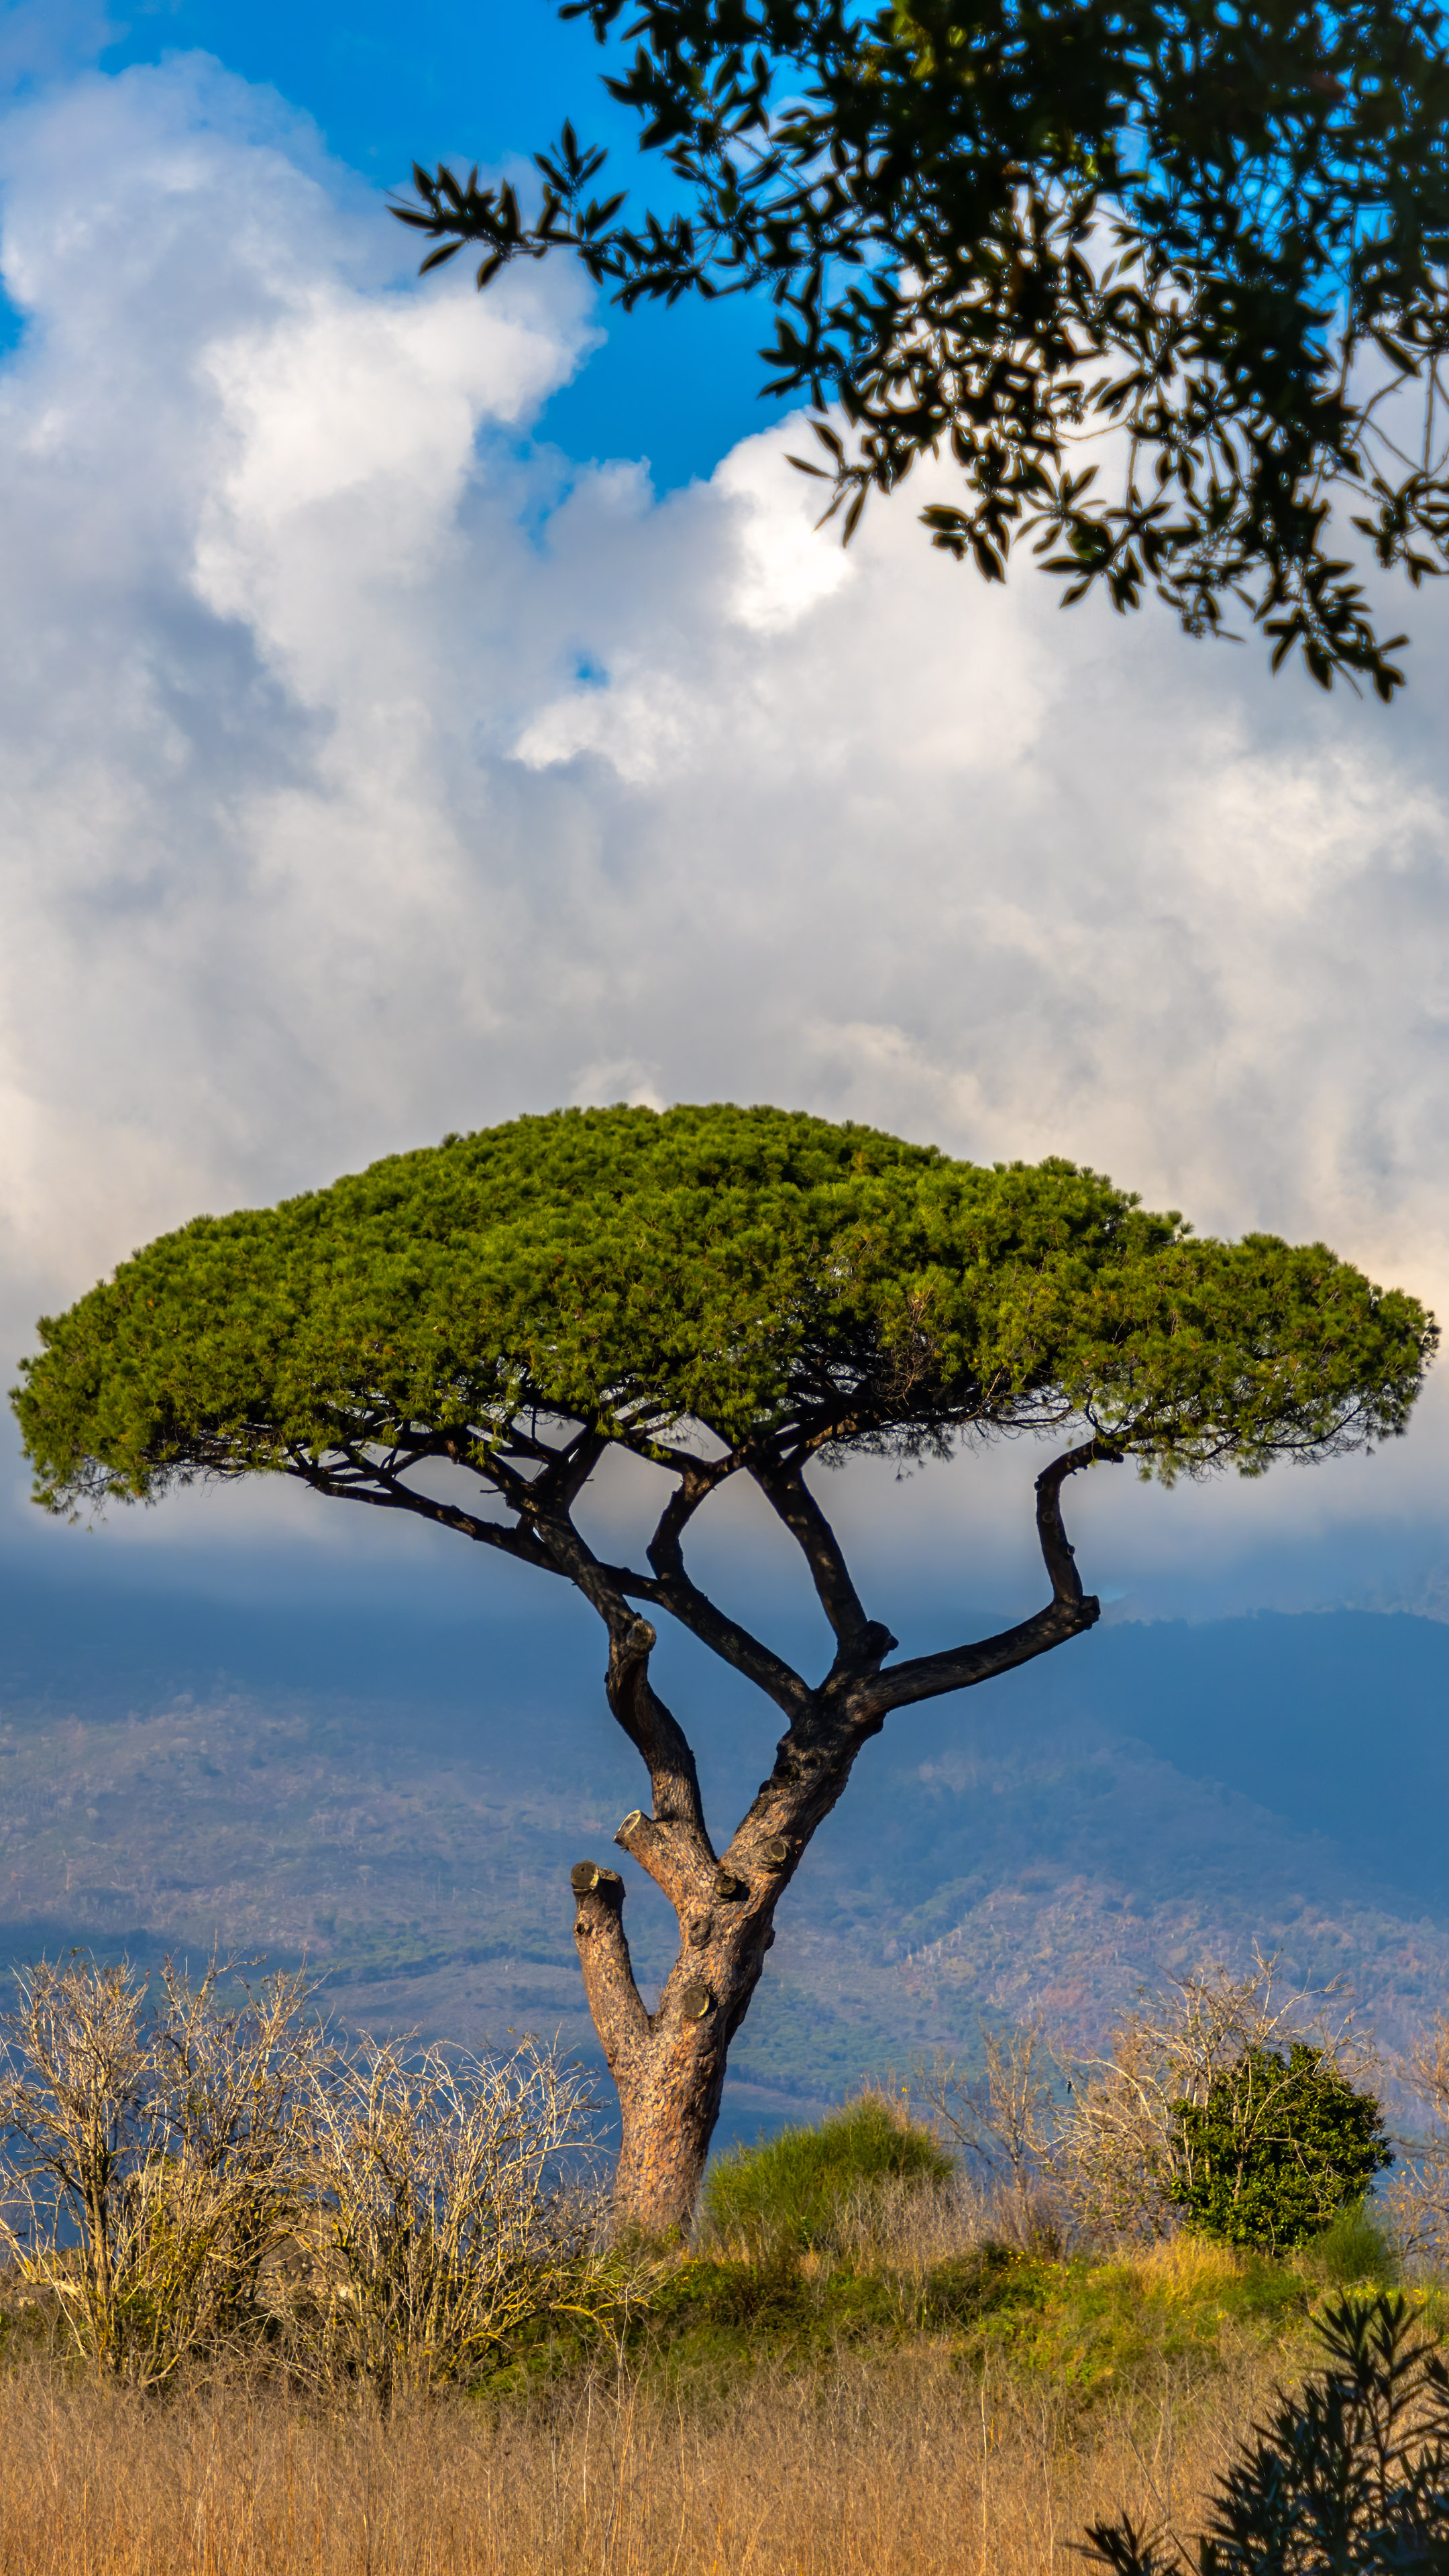 Transform your iPhone with our cool wallpapers, showcasing a majestic tree set against the backdrop of Italy’s breathtaking landscapes.